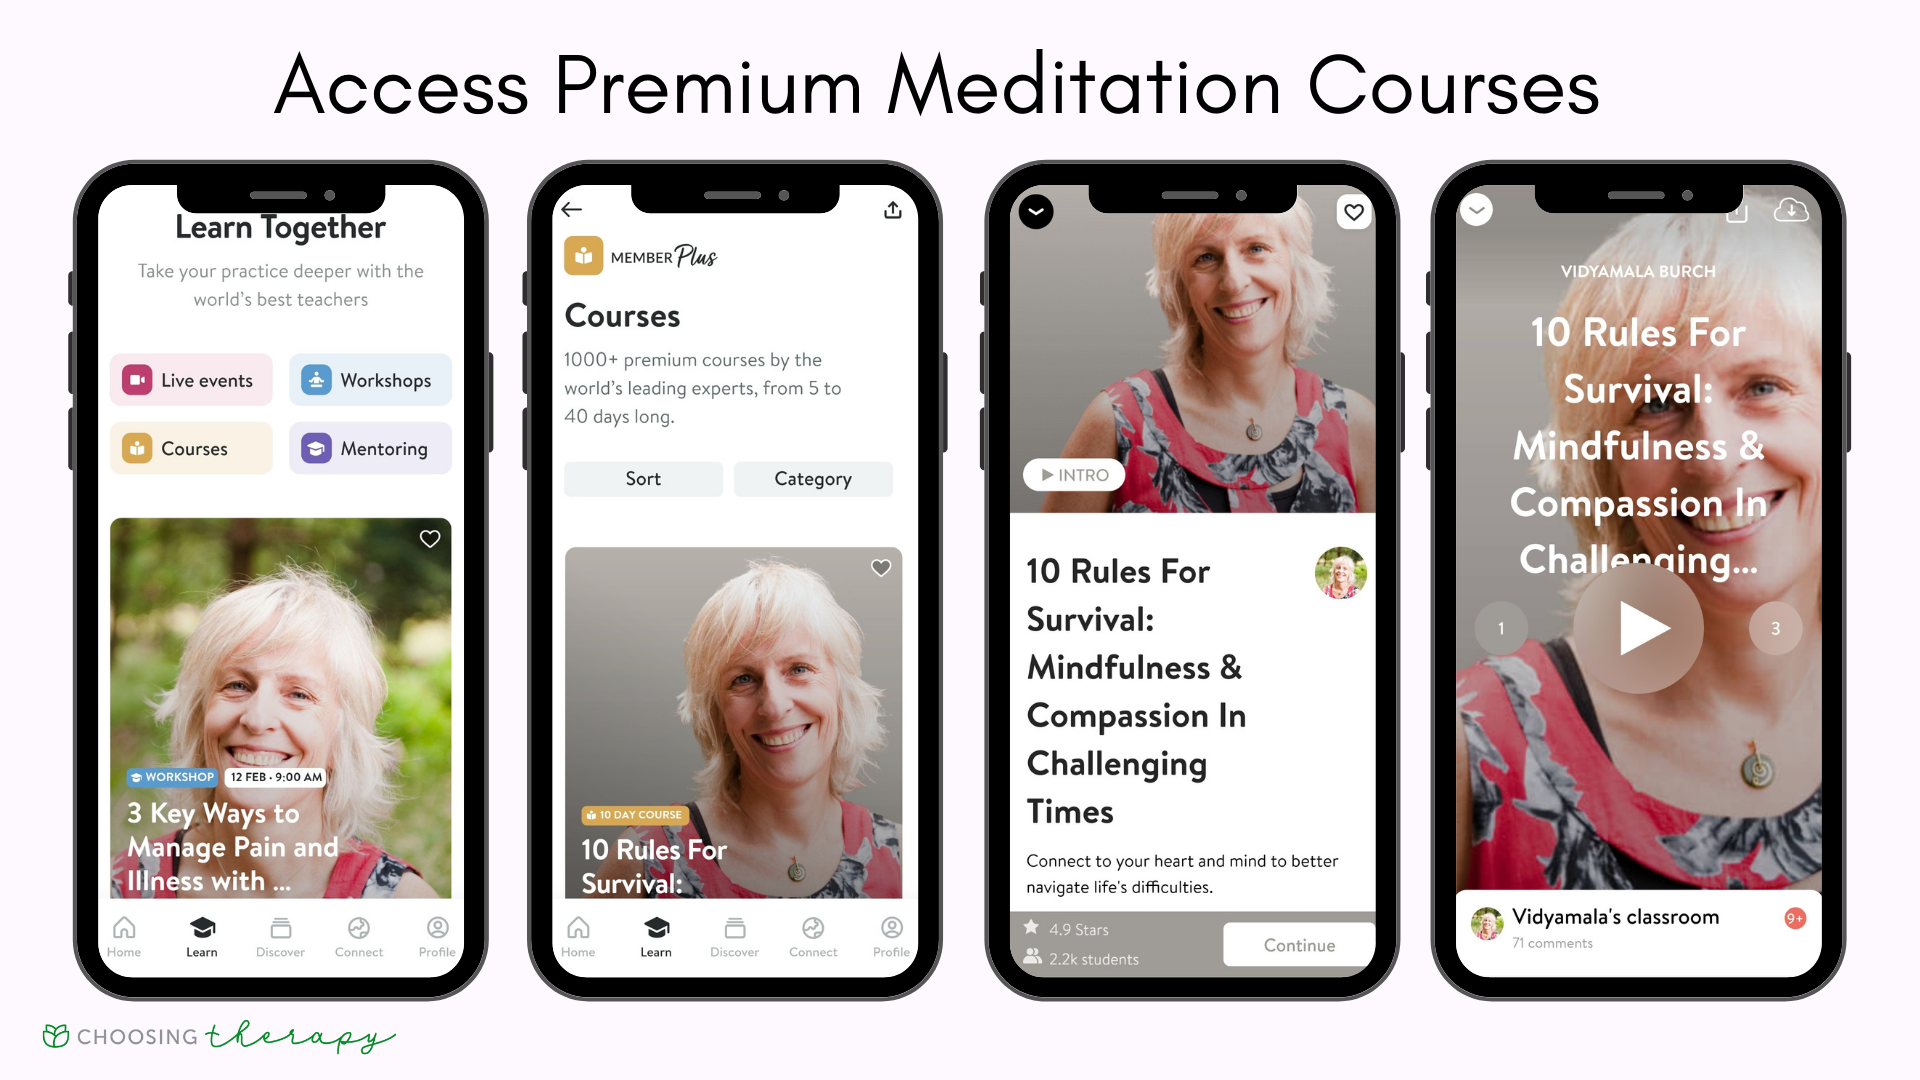 Insight Timer App Review 2022 - Image of the premium content in the learn hub, full meditation courses